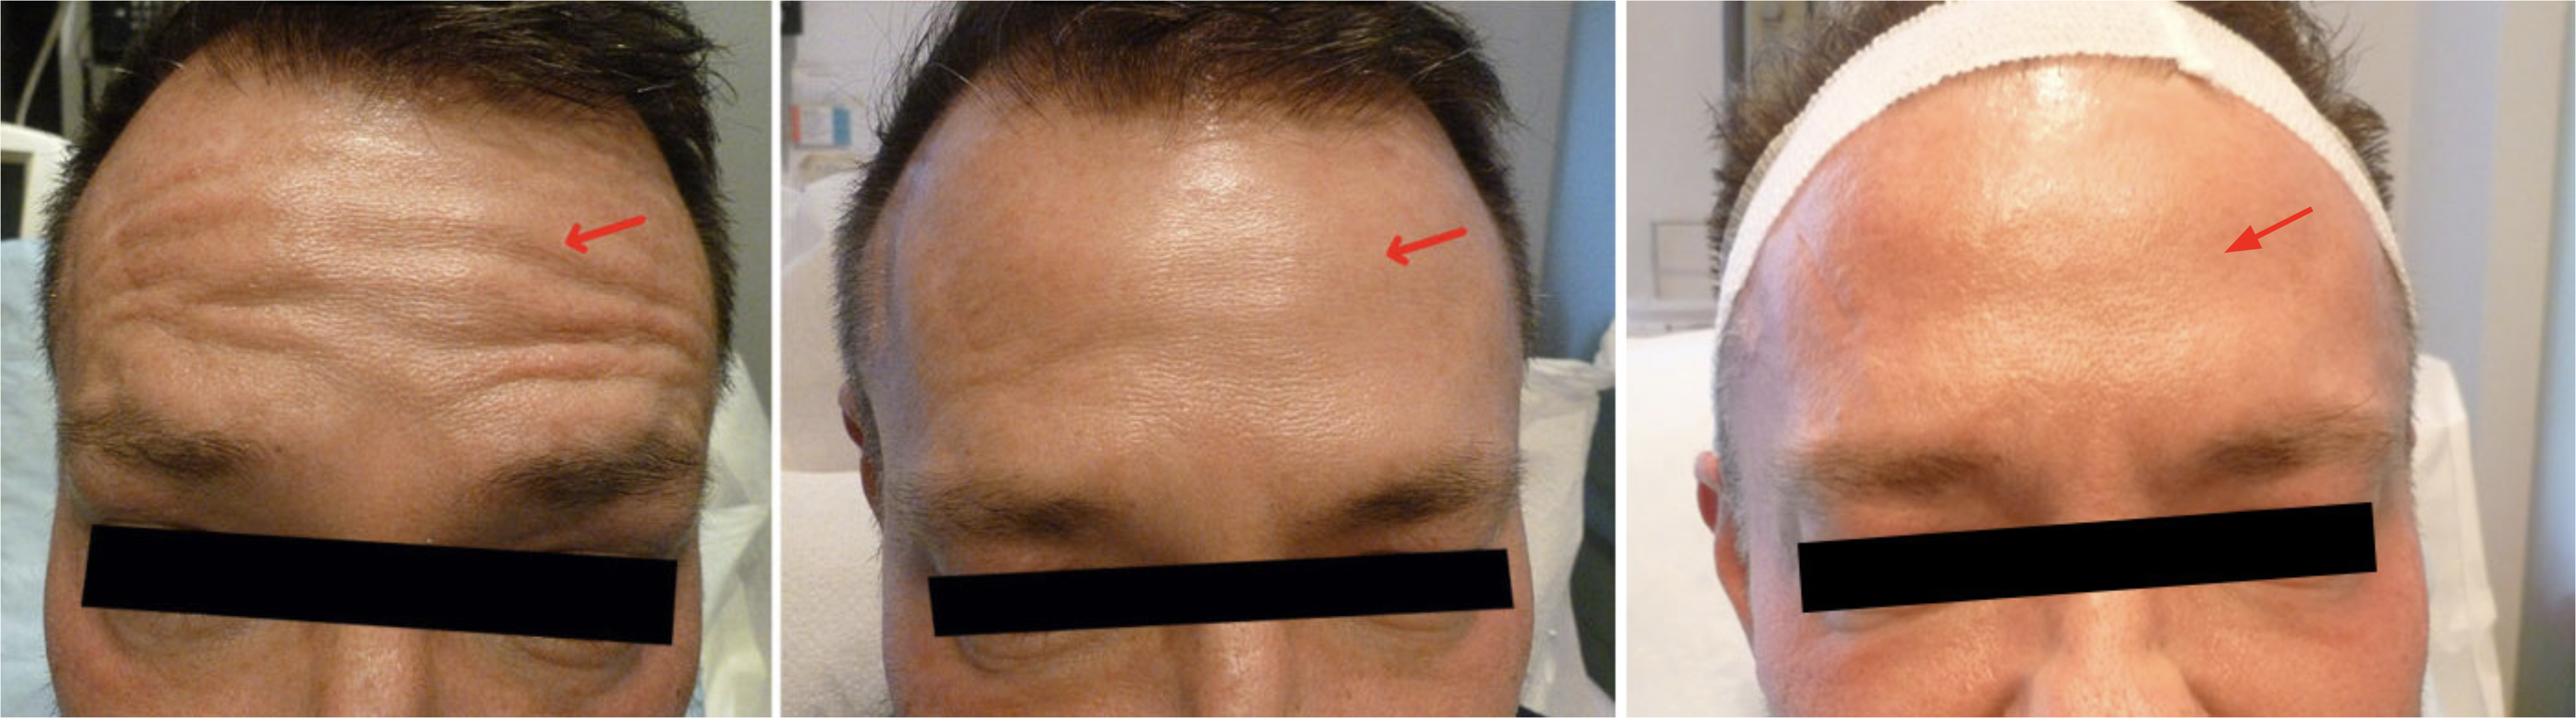 FOREHEAD BEFORE / AFTER BOTOX